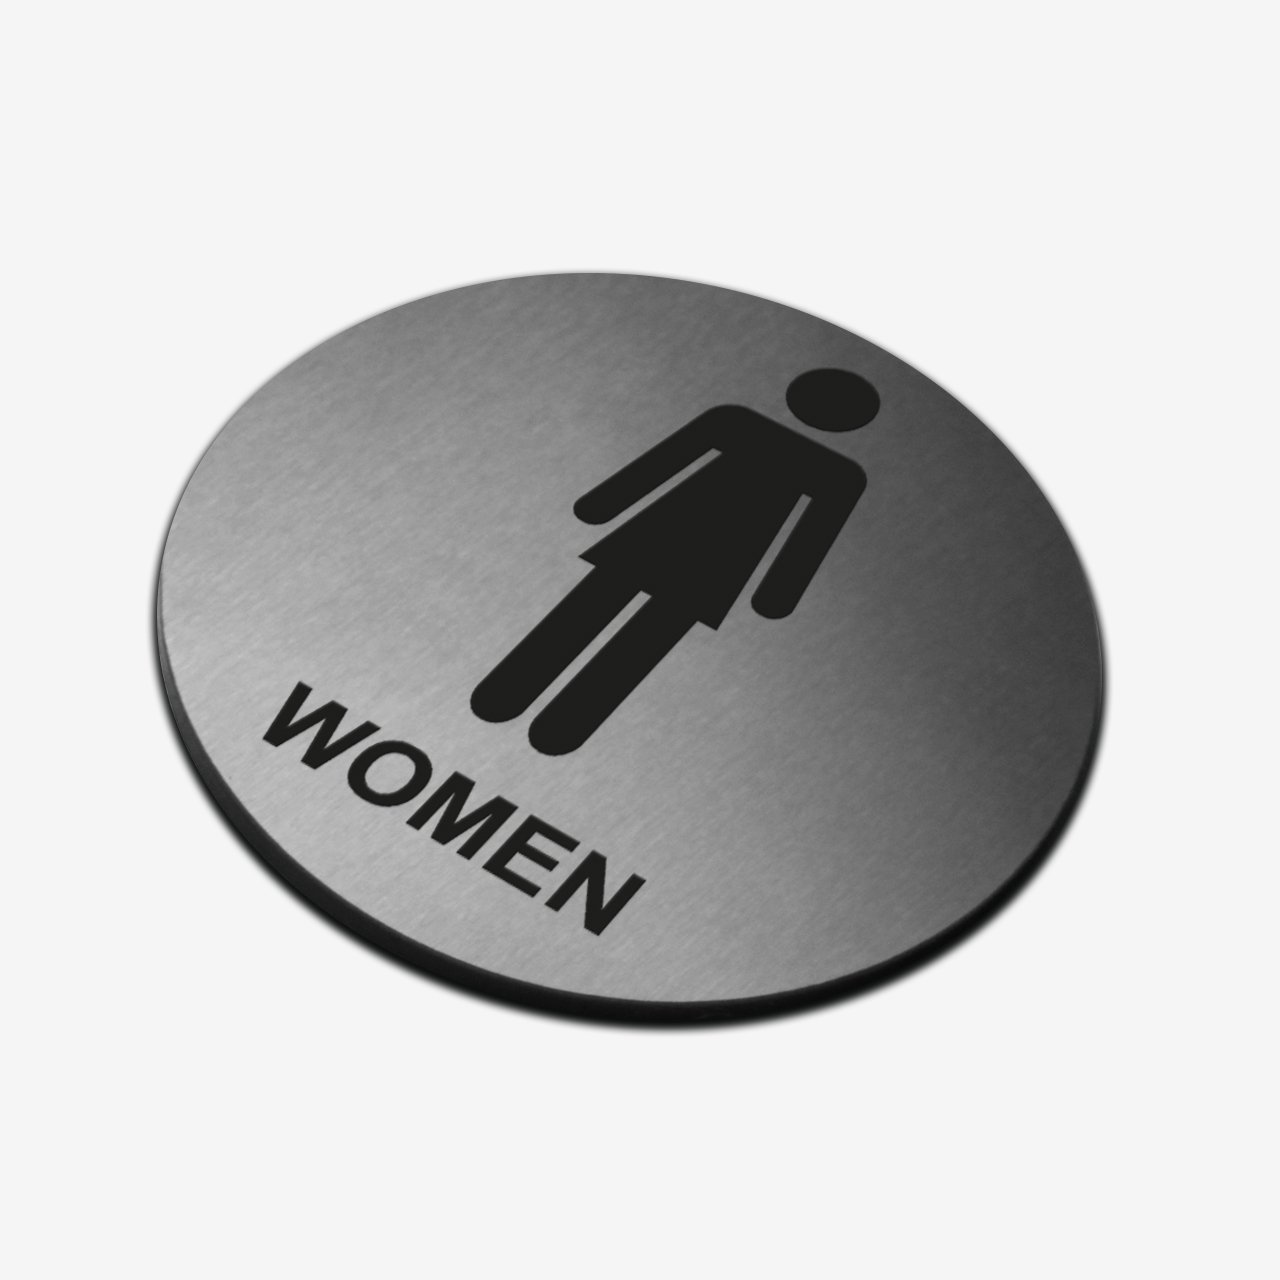 Woman WC - Stainless Steel Sign Bathroom Signs circle Bsign